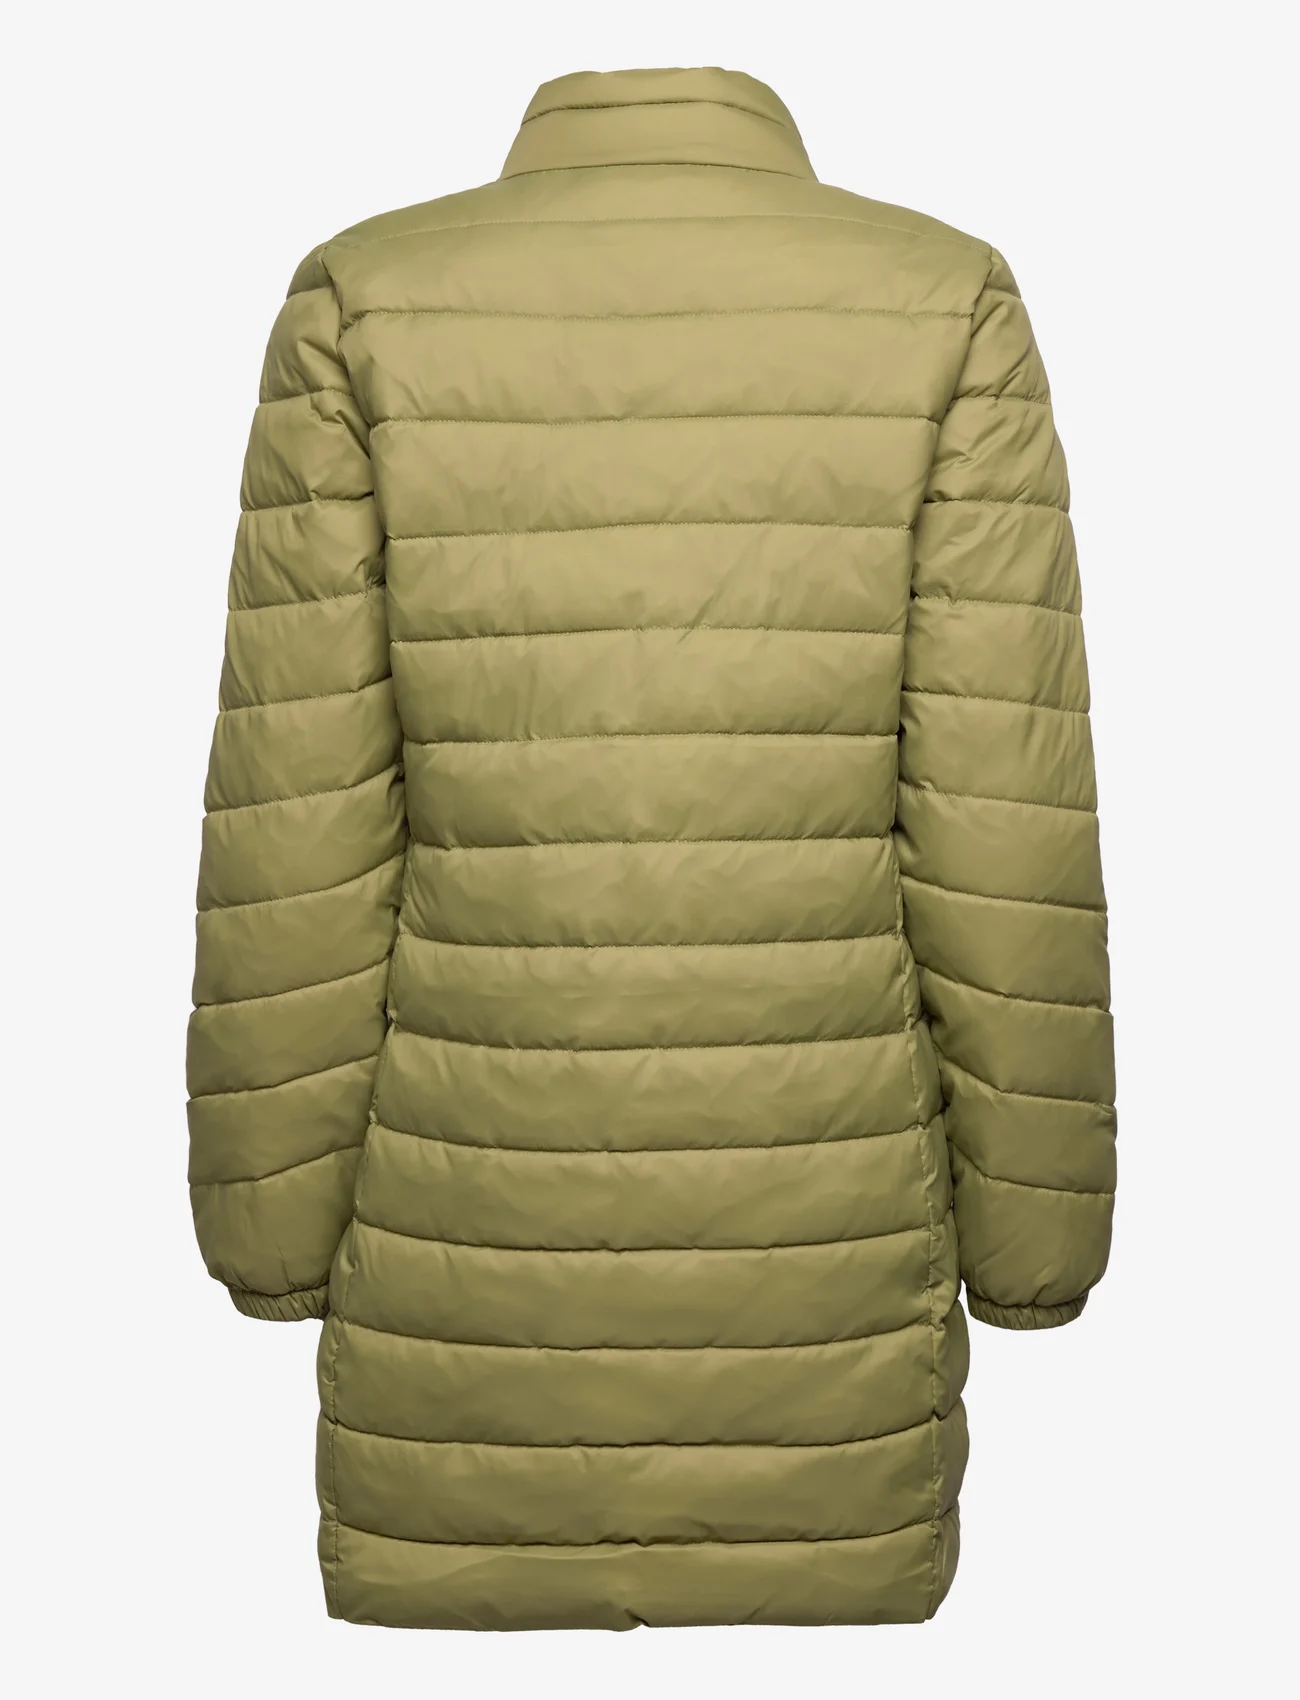 ONLY - ONLNINA QUILTED COAT OTW - winter jackets - green moss - 1